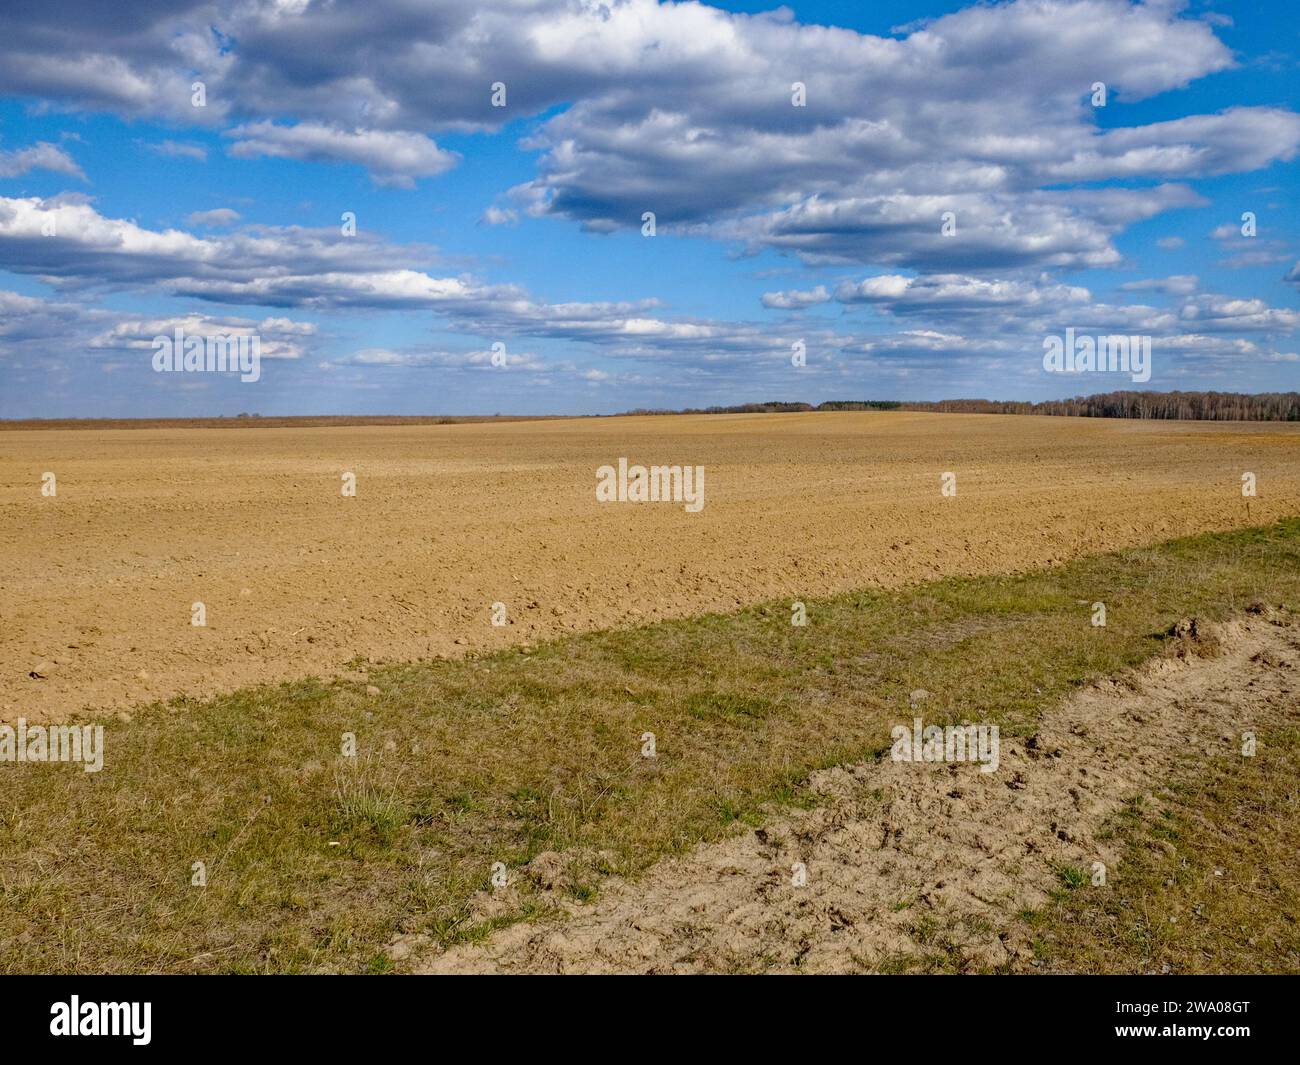 A vast field under a sky filled with fluffy clouds. Stock Photo